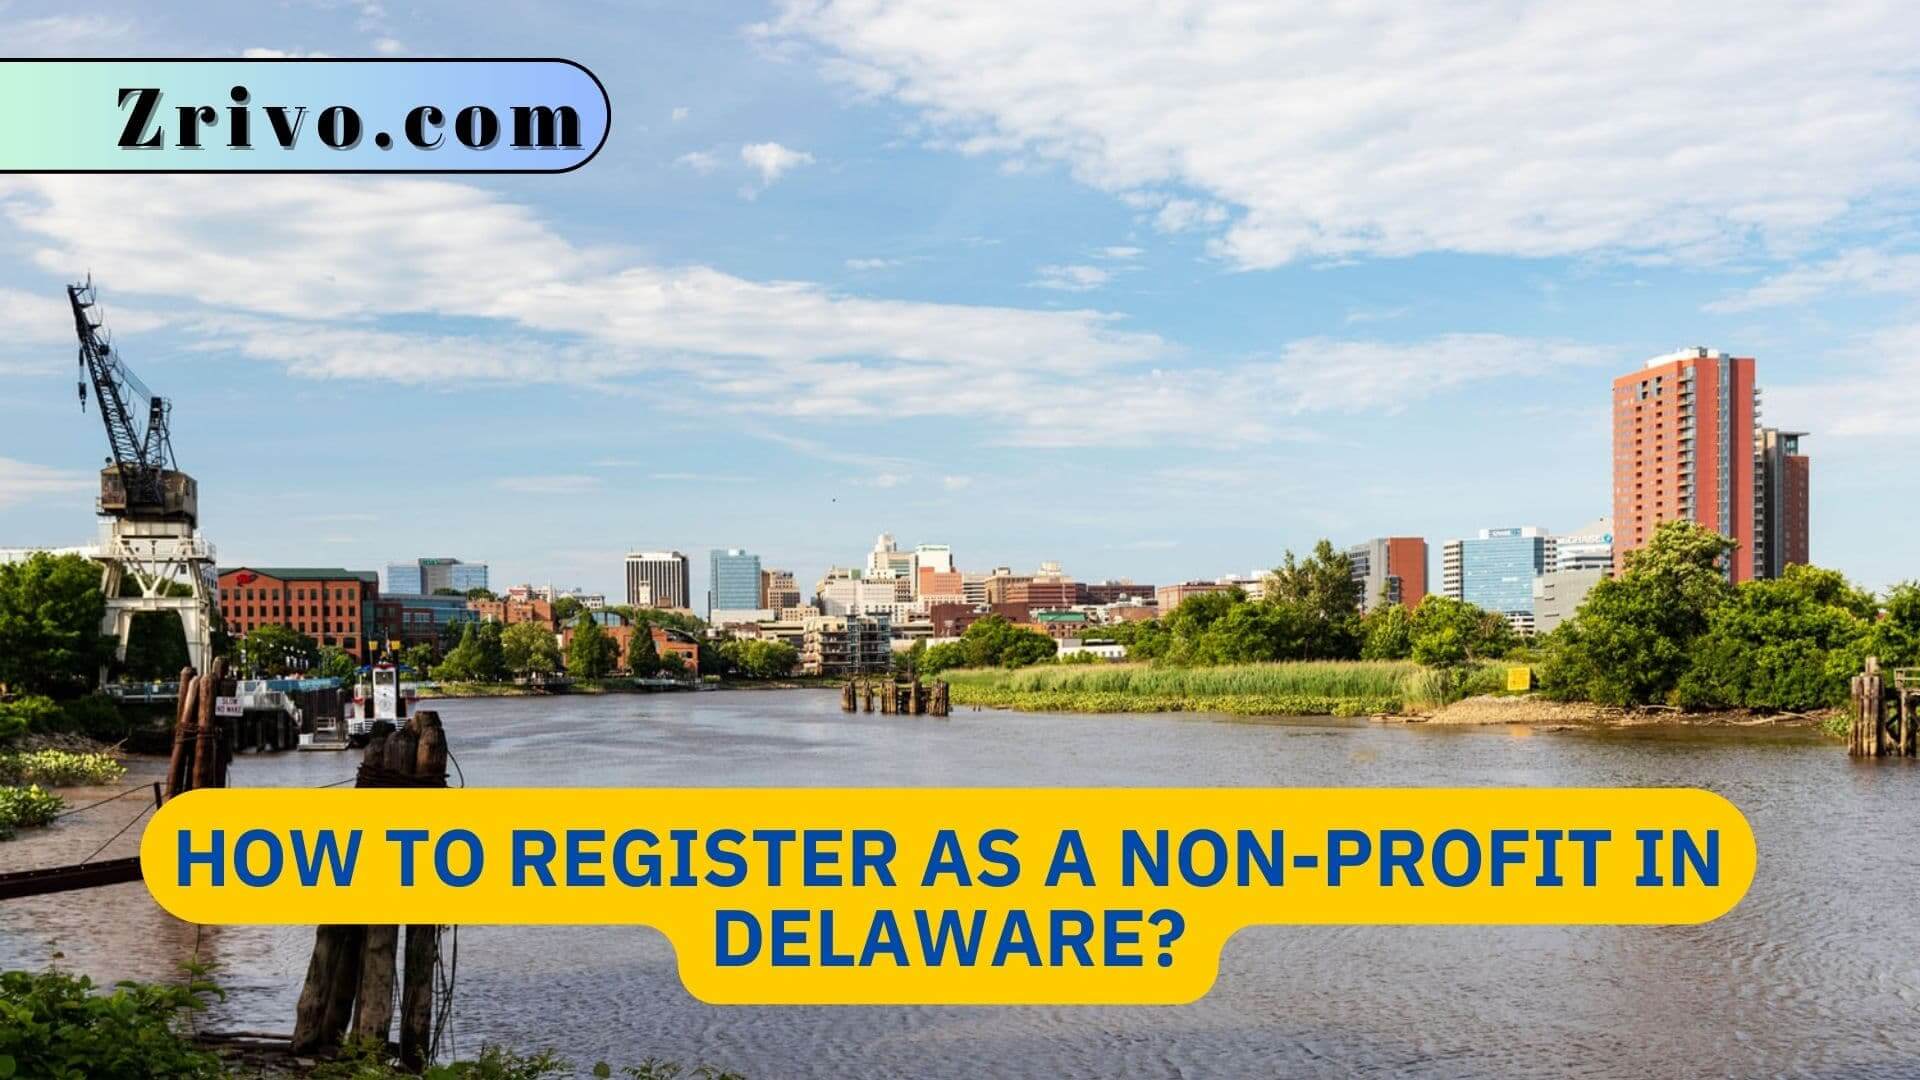 How to Register As a Non-Profit in Delaware